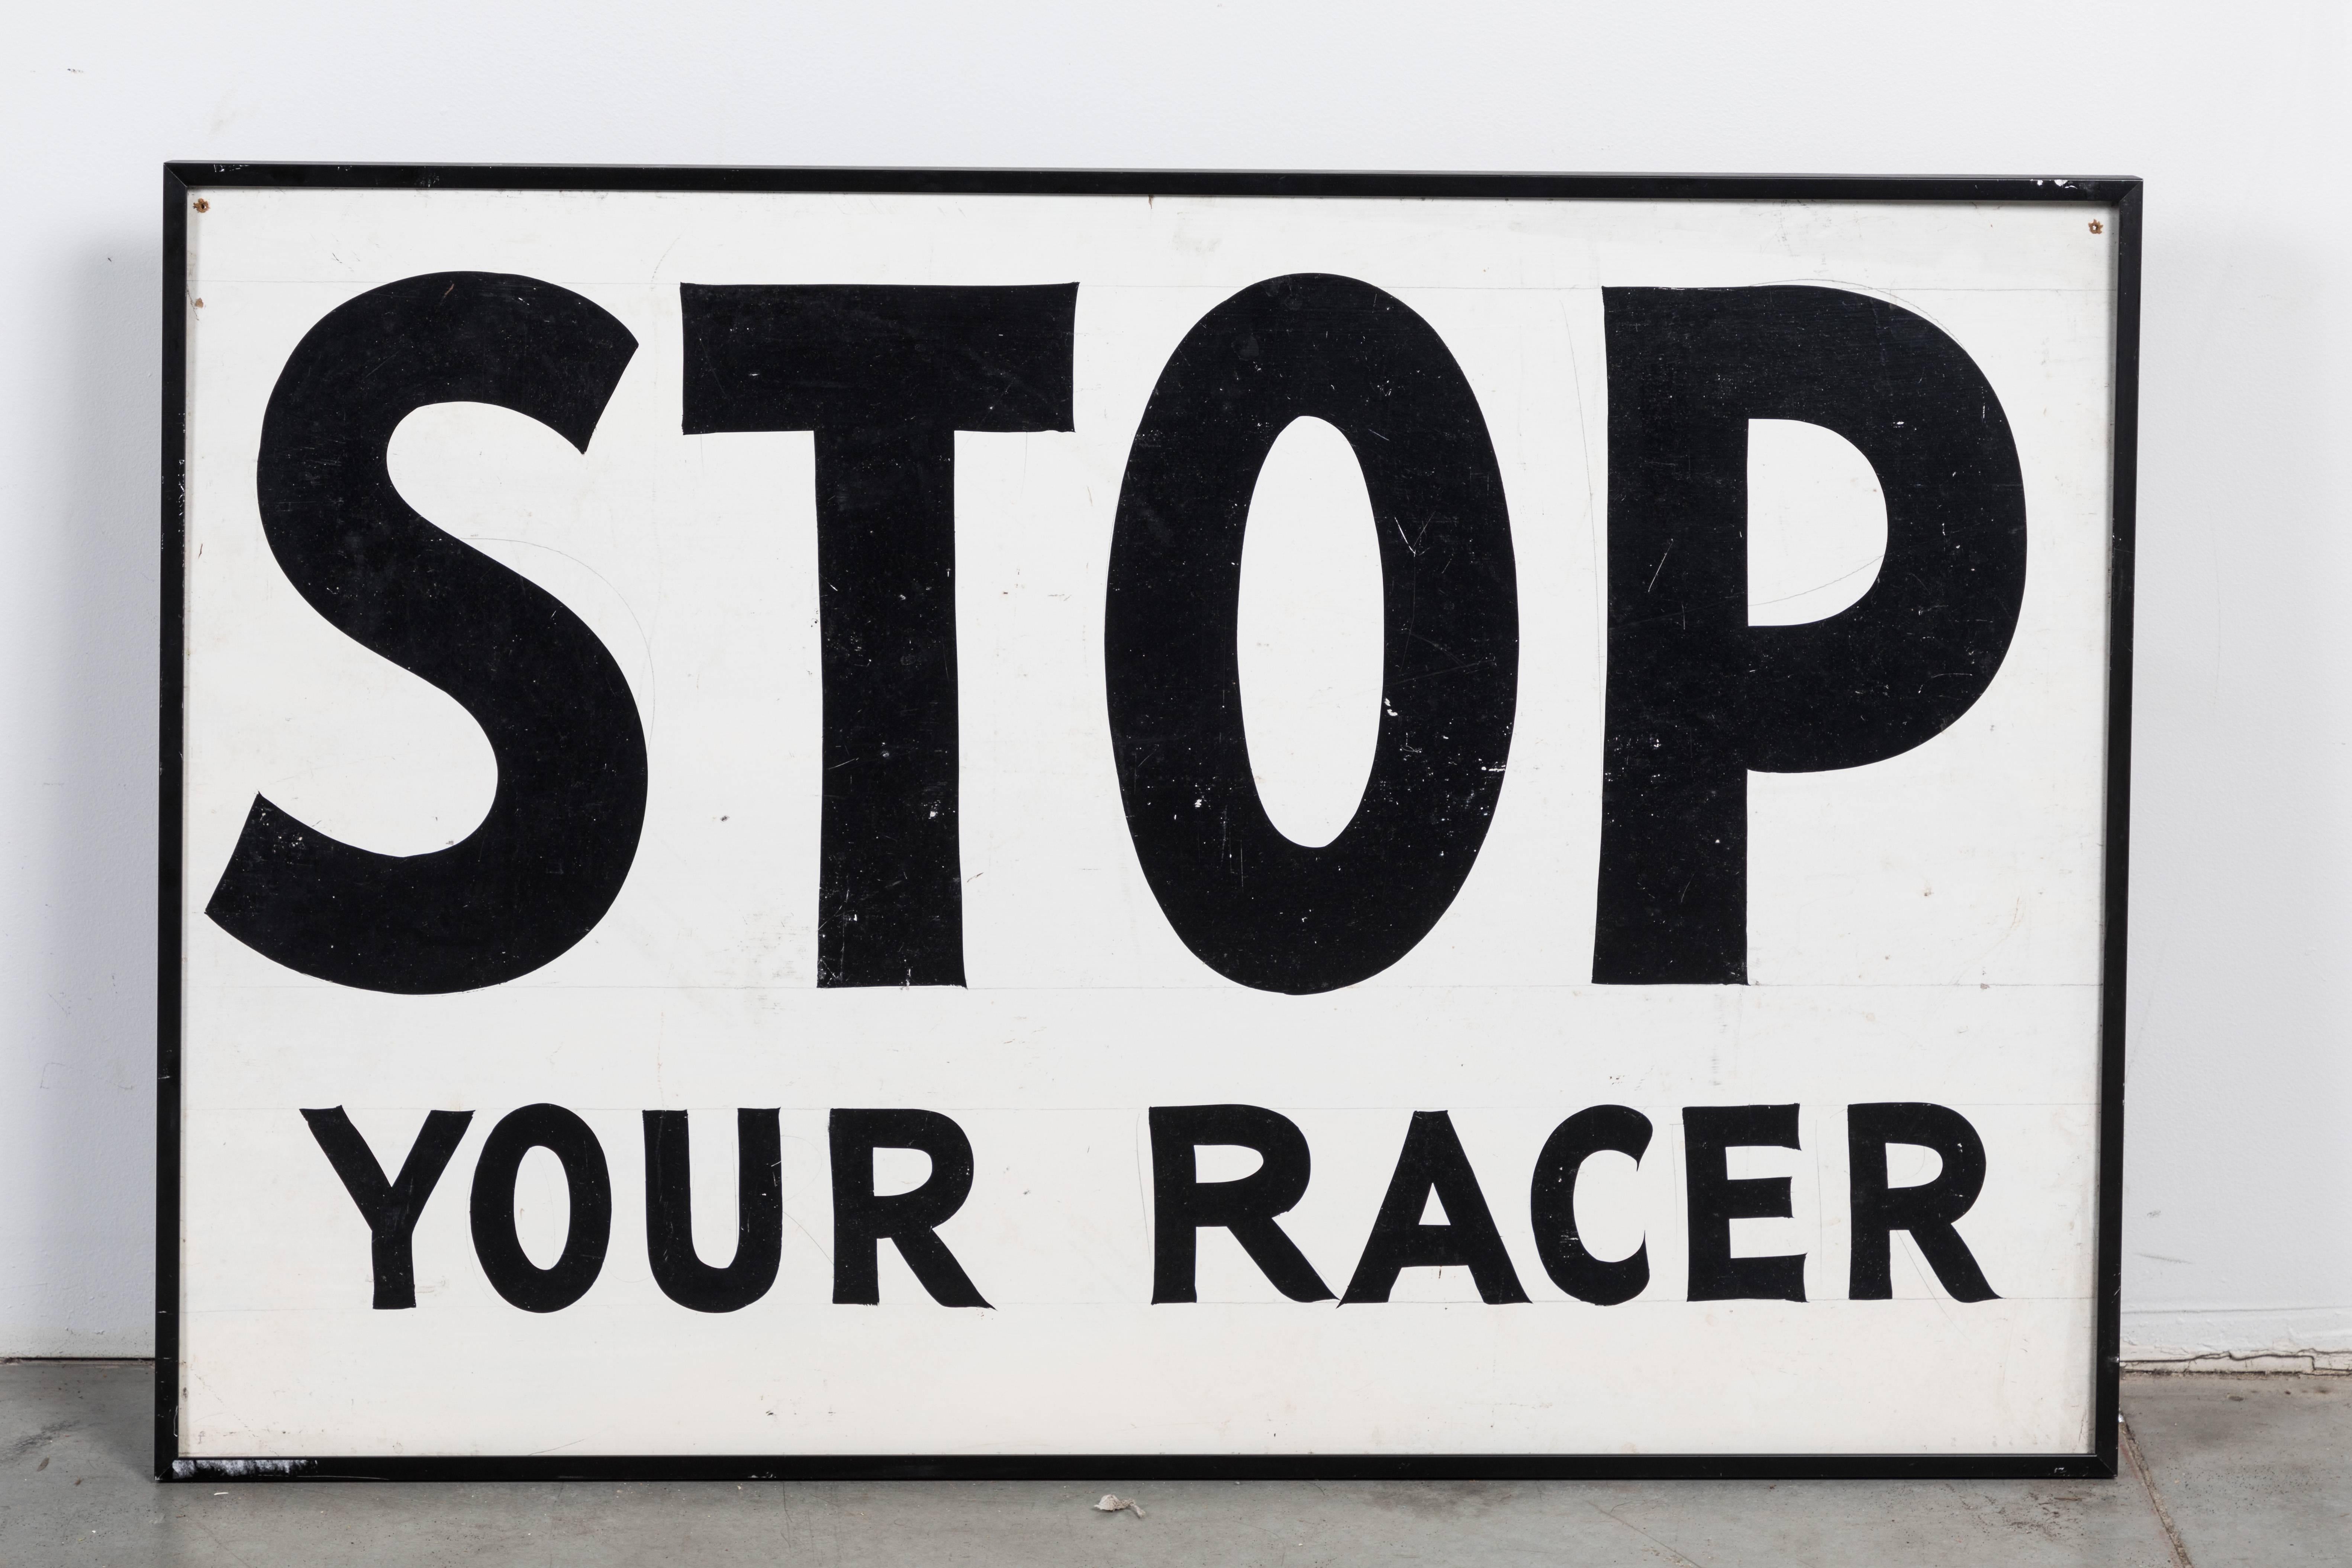 Graphic hand-painted signs. Most likely from an American soap box derby race track or perhaps carnival midway ride. Presented in black wraparound metal frame.